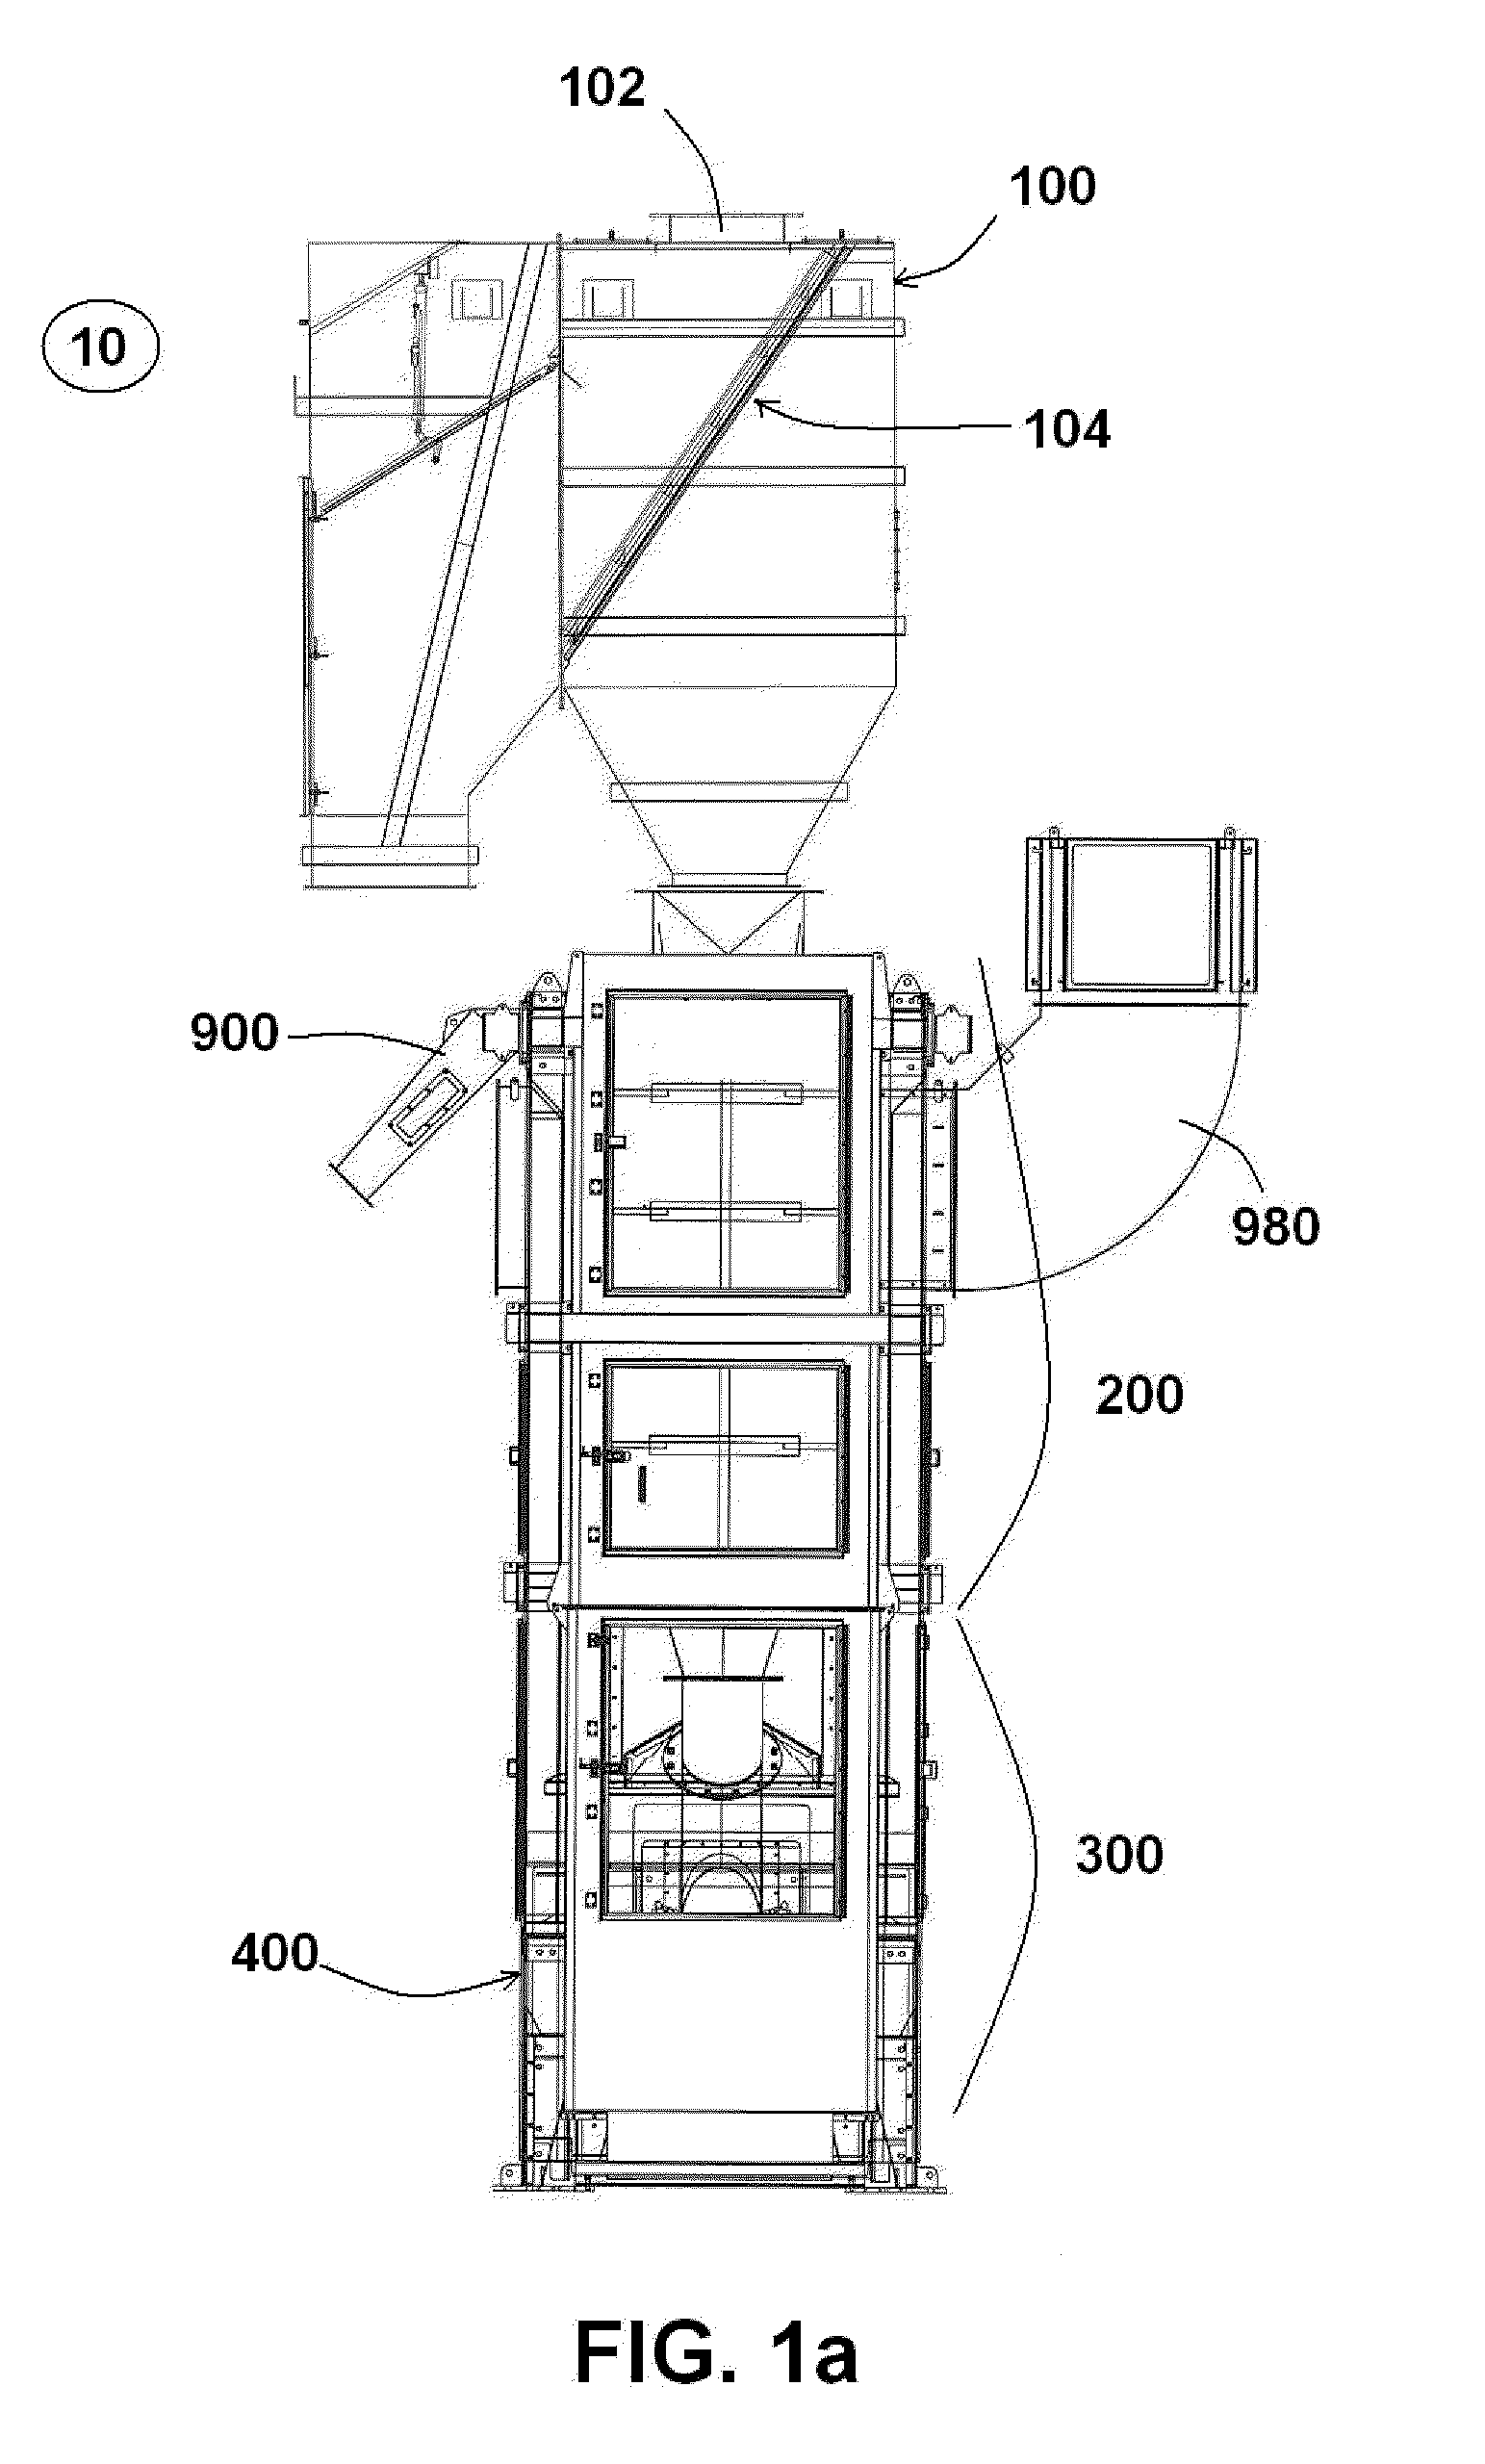 Dryer System With Improved Throughput